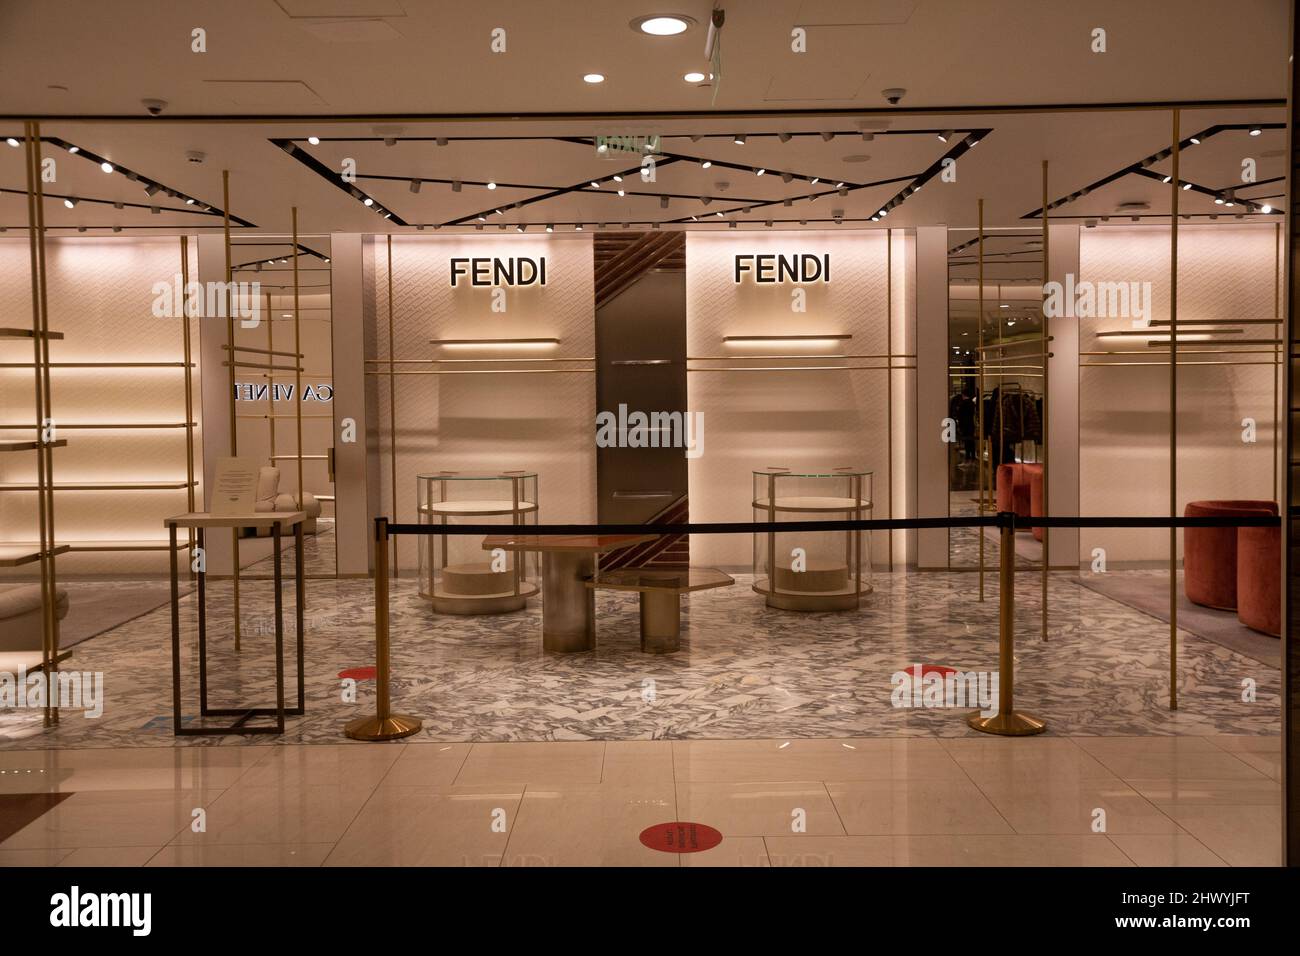 Gucci flagship store, Petrovka street, Moscow – Stock Editorial